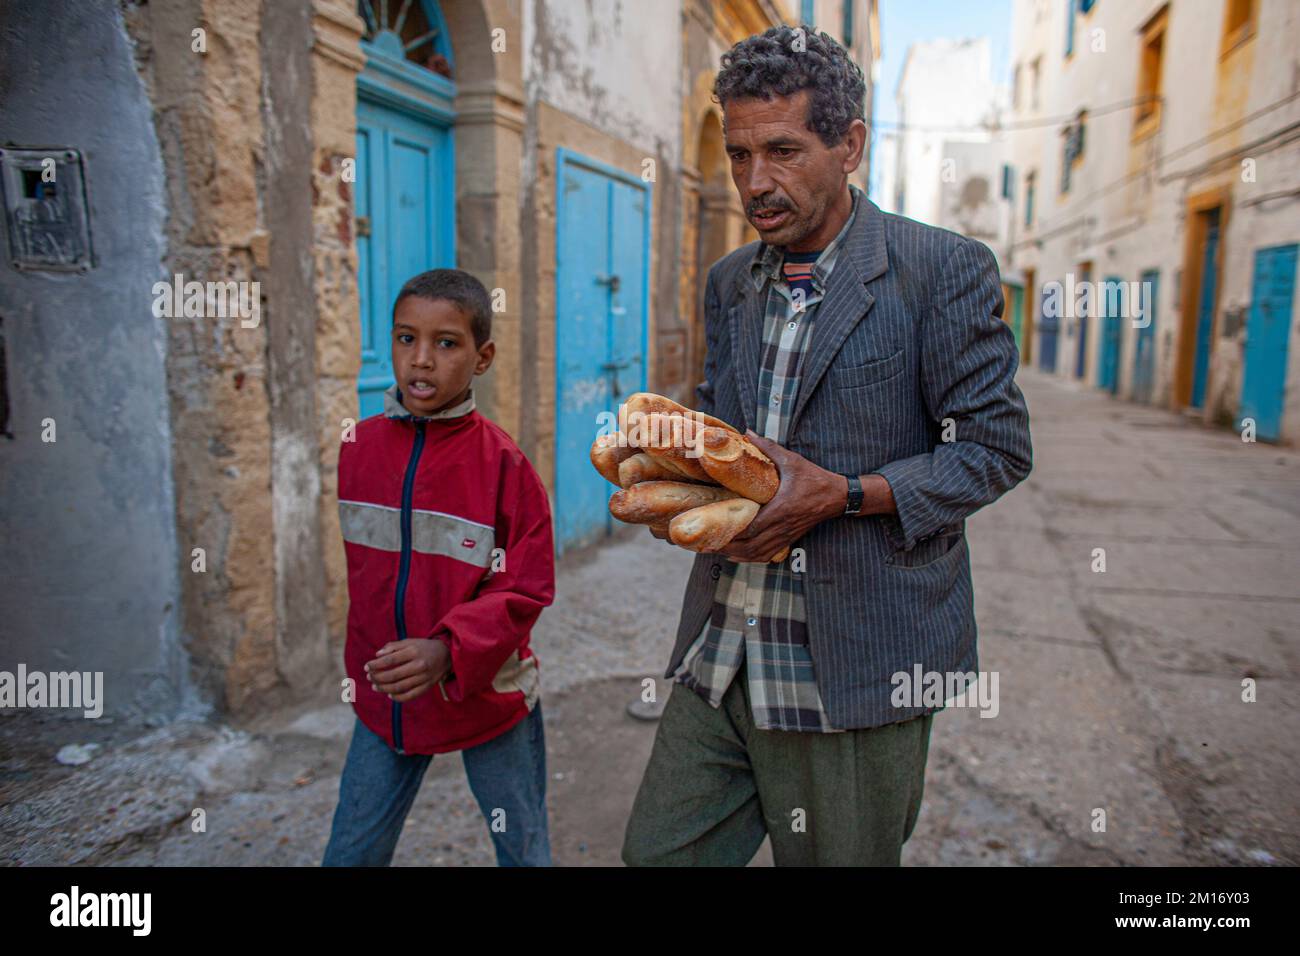 Street scene father and son carry baguettes in the Medina of Essaouira Morocco. Stock Photo